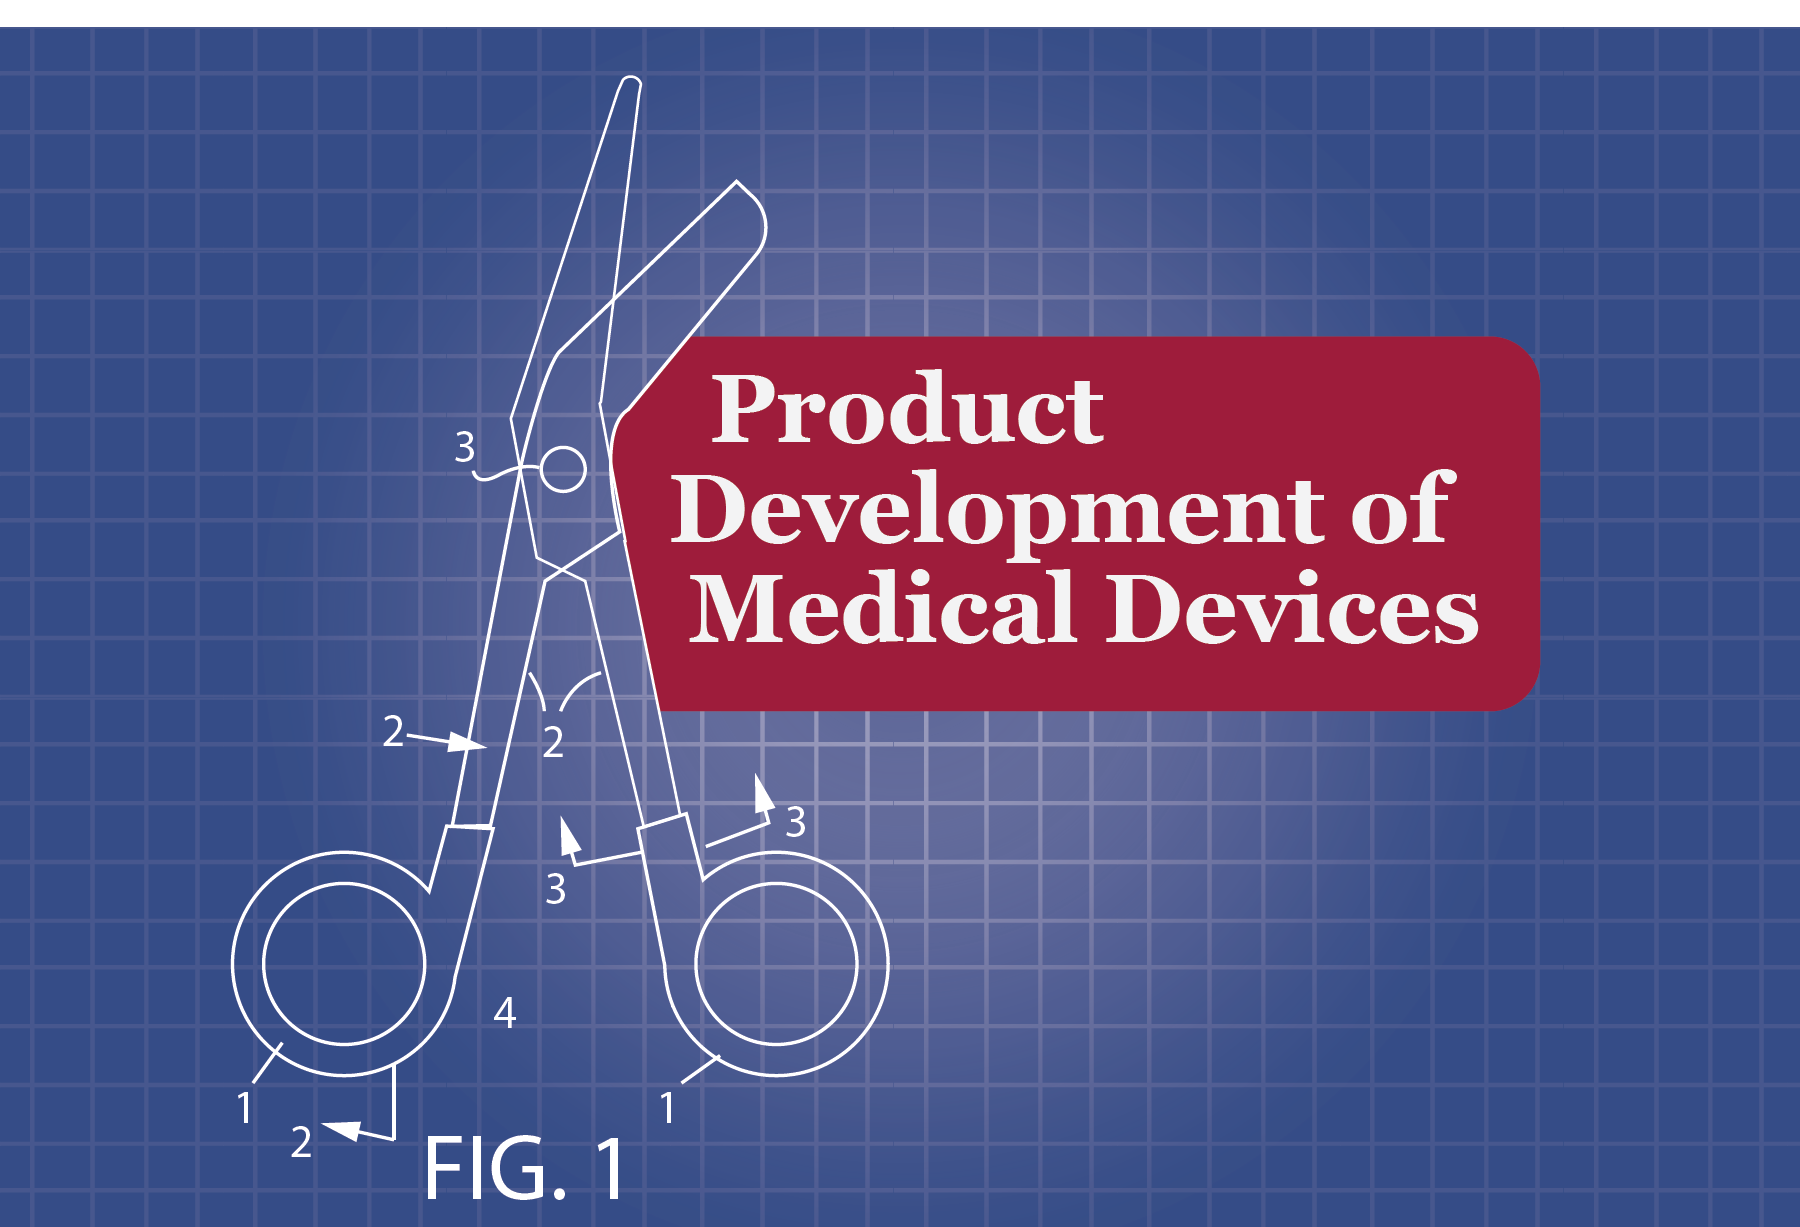 Product Development of Medical Devices